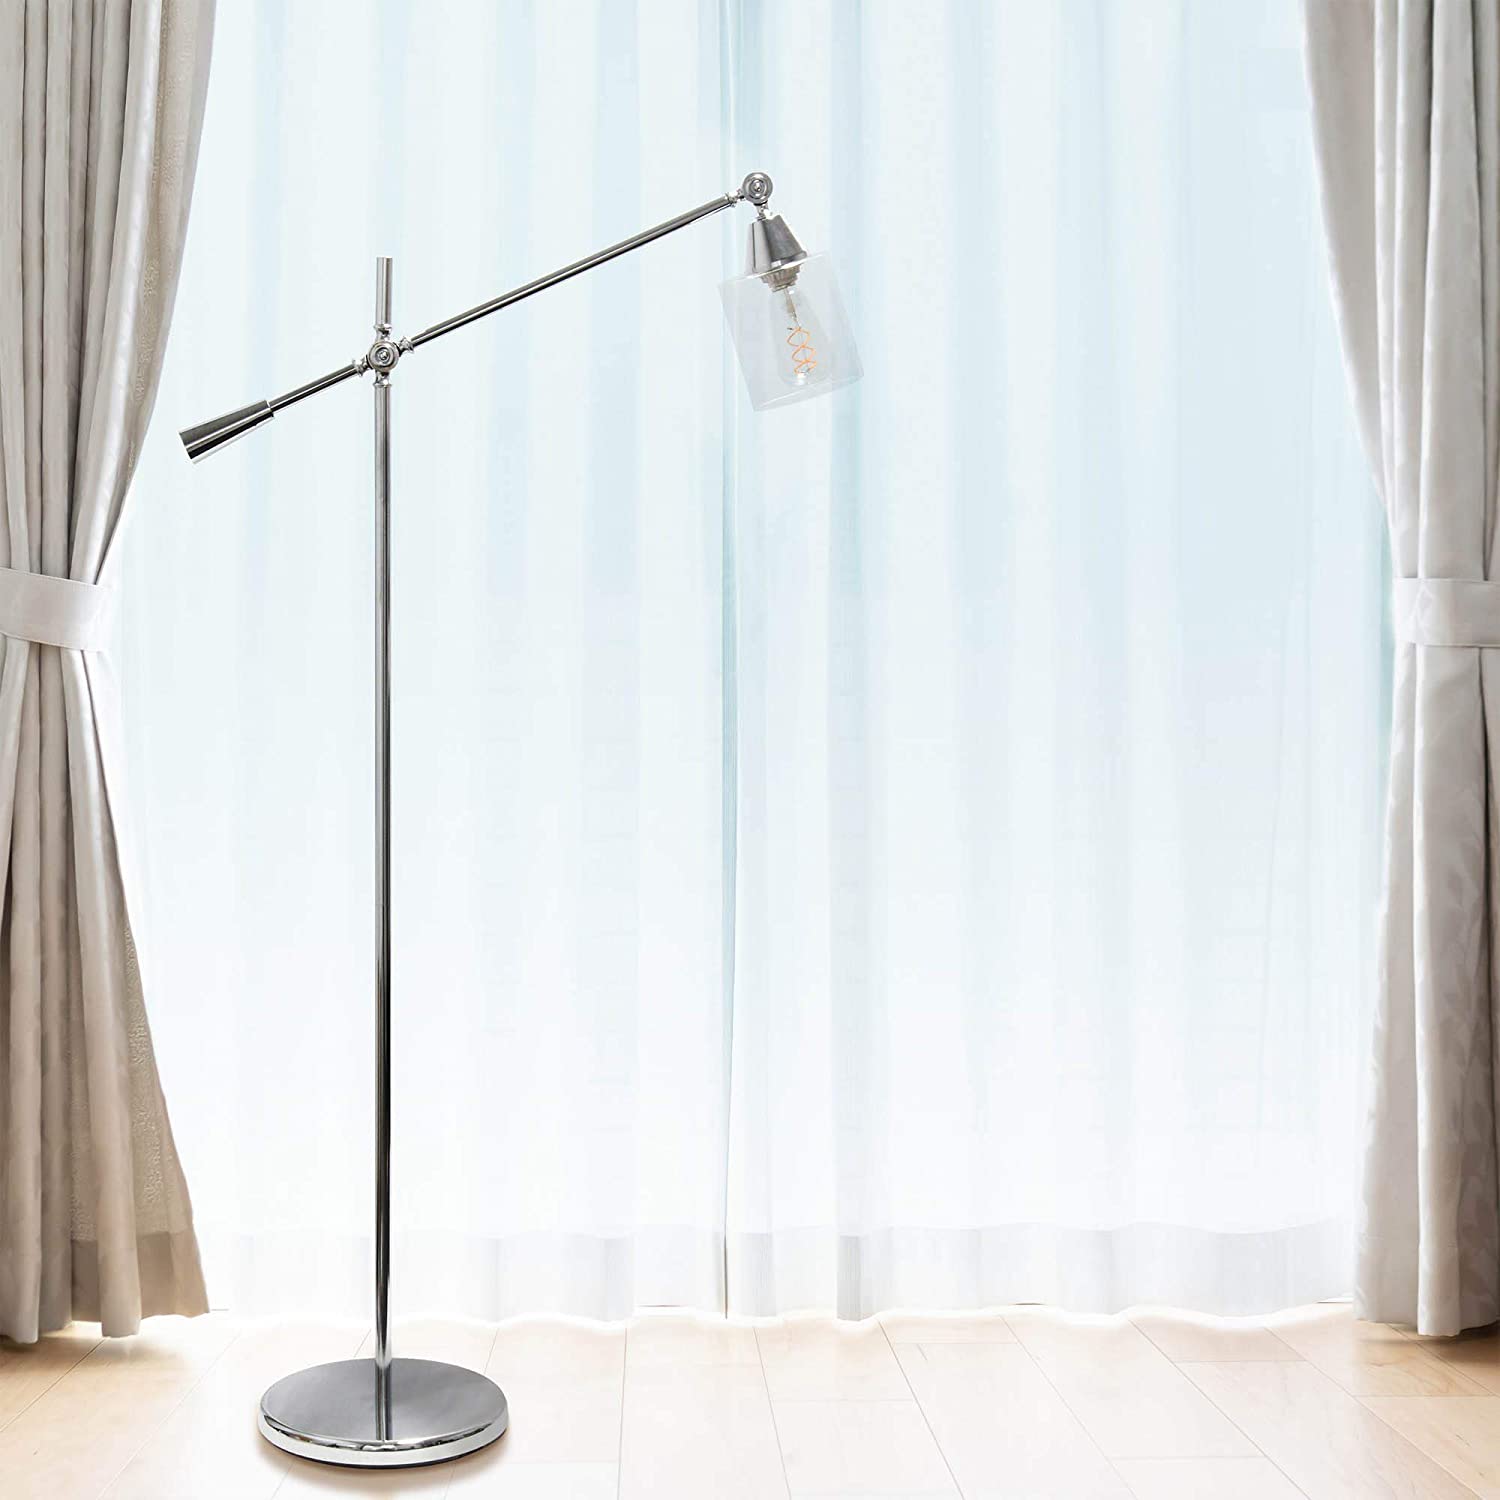 Lalia Home Decorative Swing Arm Floor Lamp with Clear Glass Cylindrical Shade, Chrome